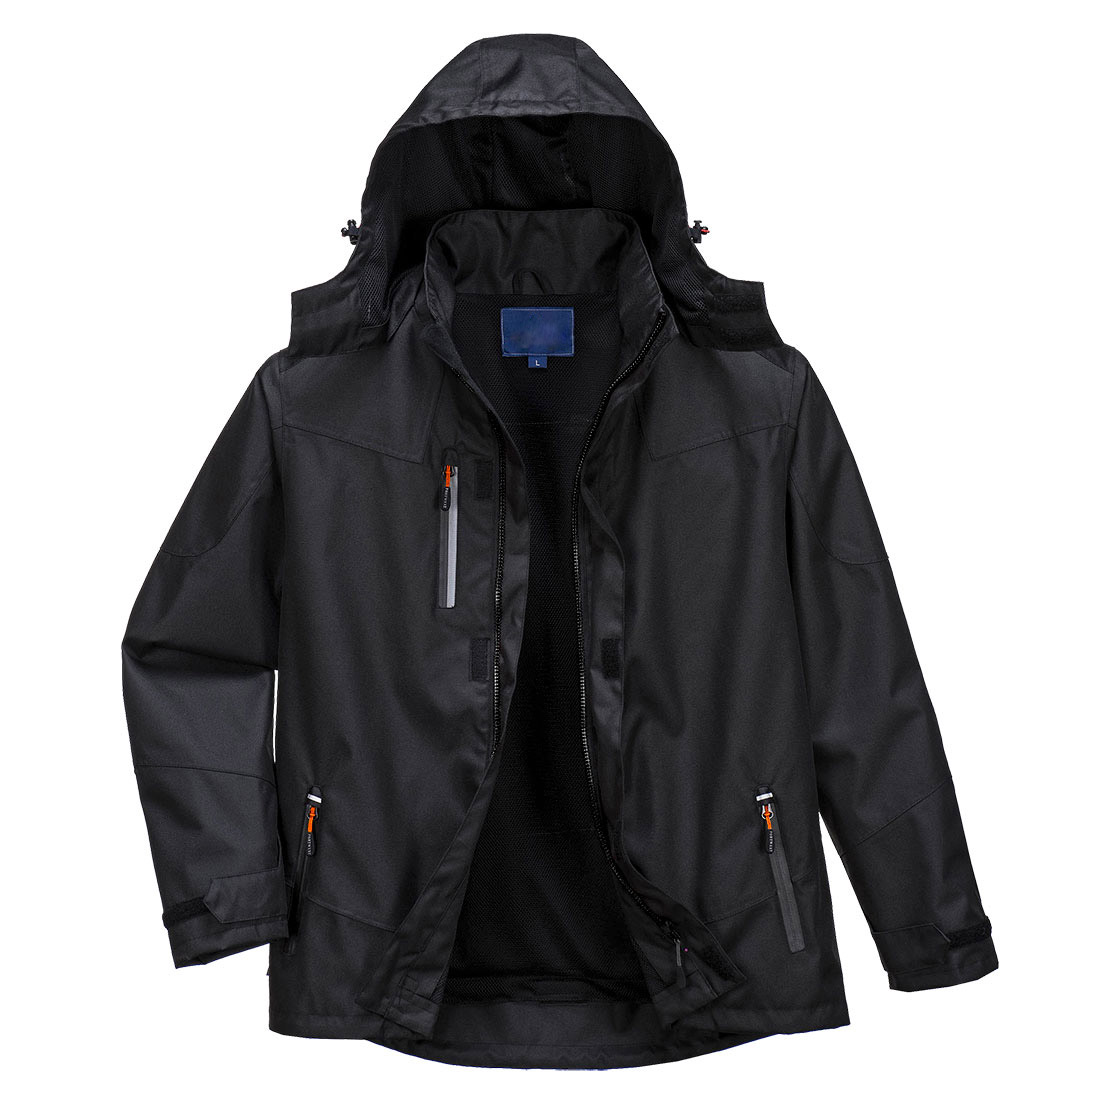 High Performance Windproof Waterproof Breathable Jacket with Storm Hood